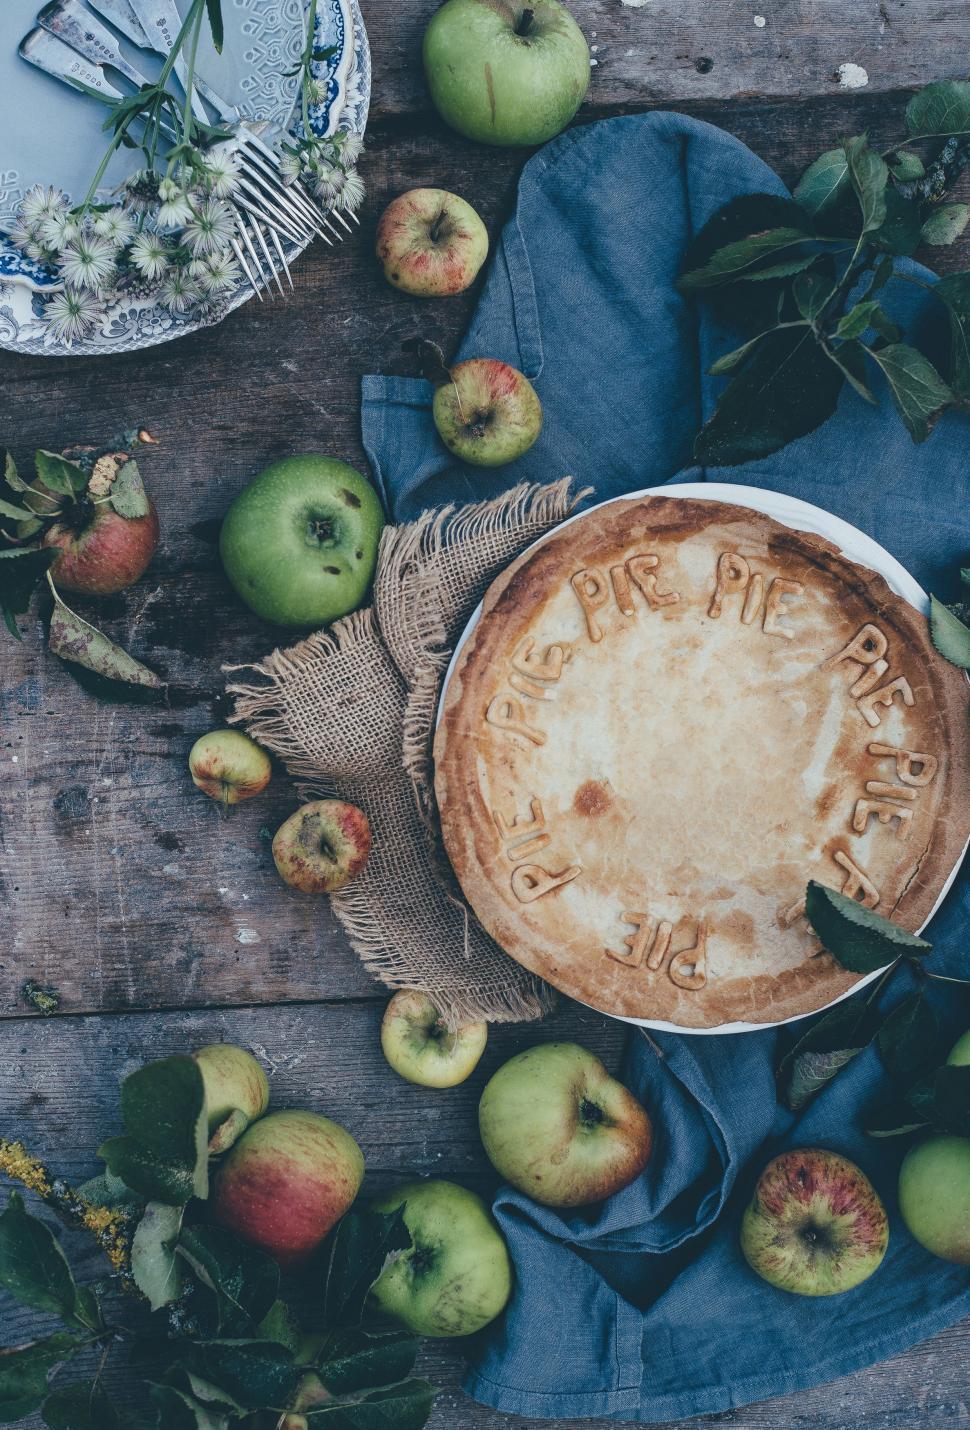 Free Image of Pie on Blue Cloth With Green Apples 